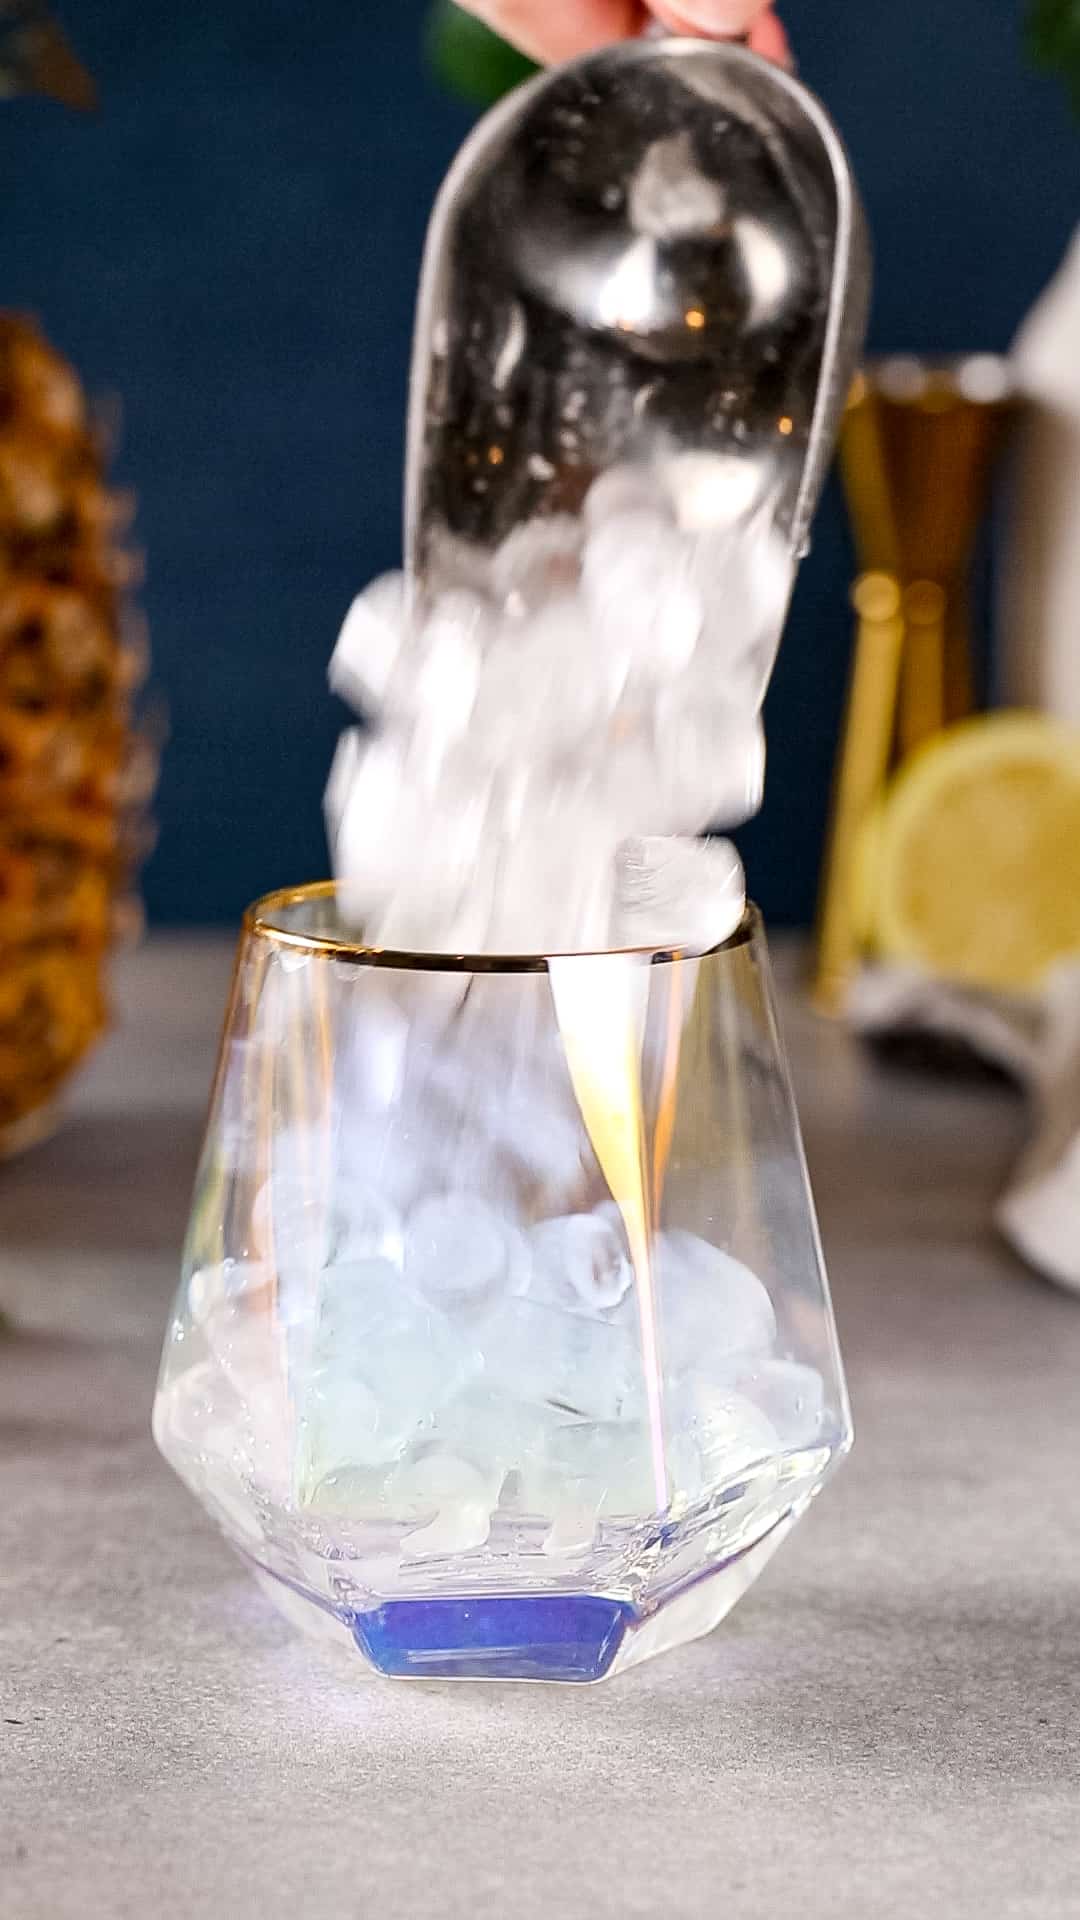 Hand using an ice scoop to add nugget ice to a cocktail glass.